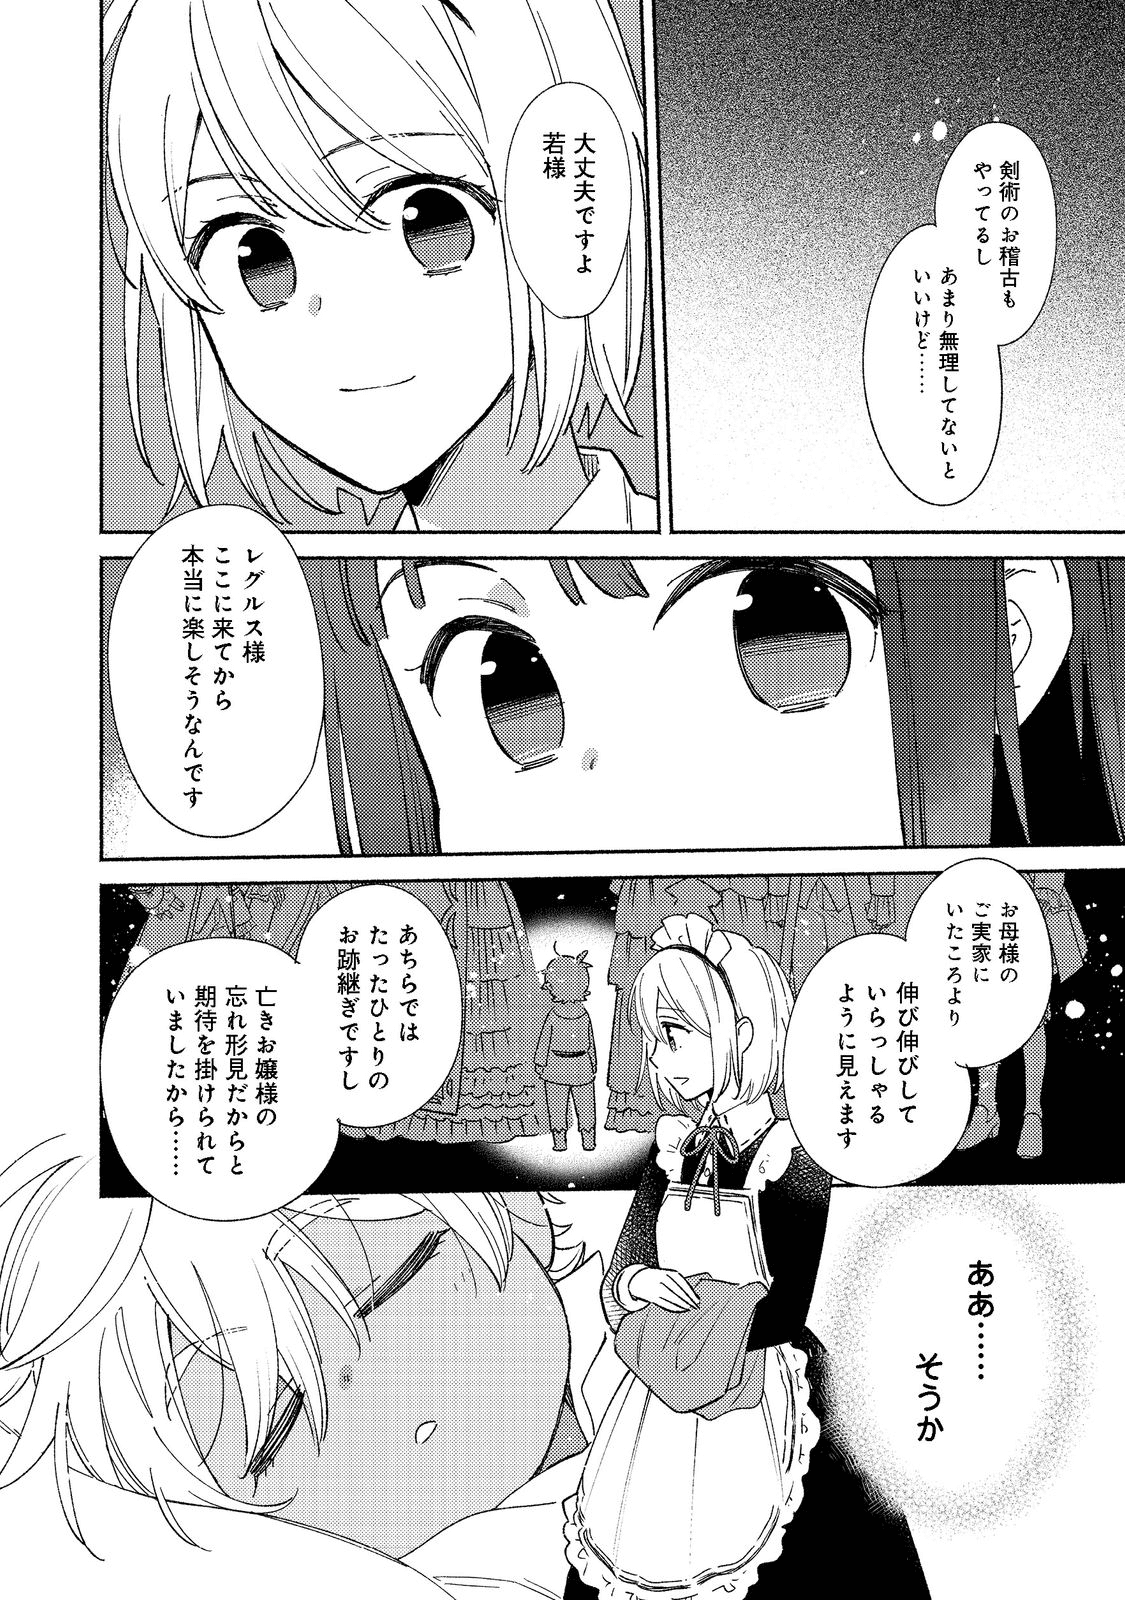 I’m the White Pig Nobleman 第14.2話 - Page 4